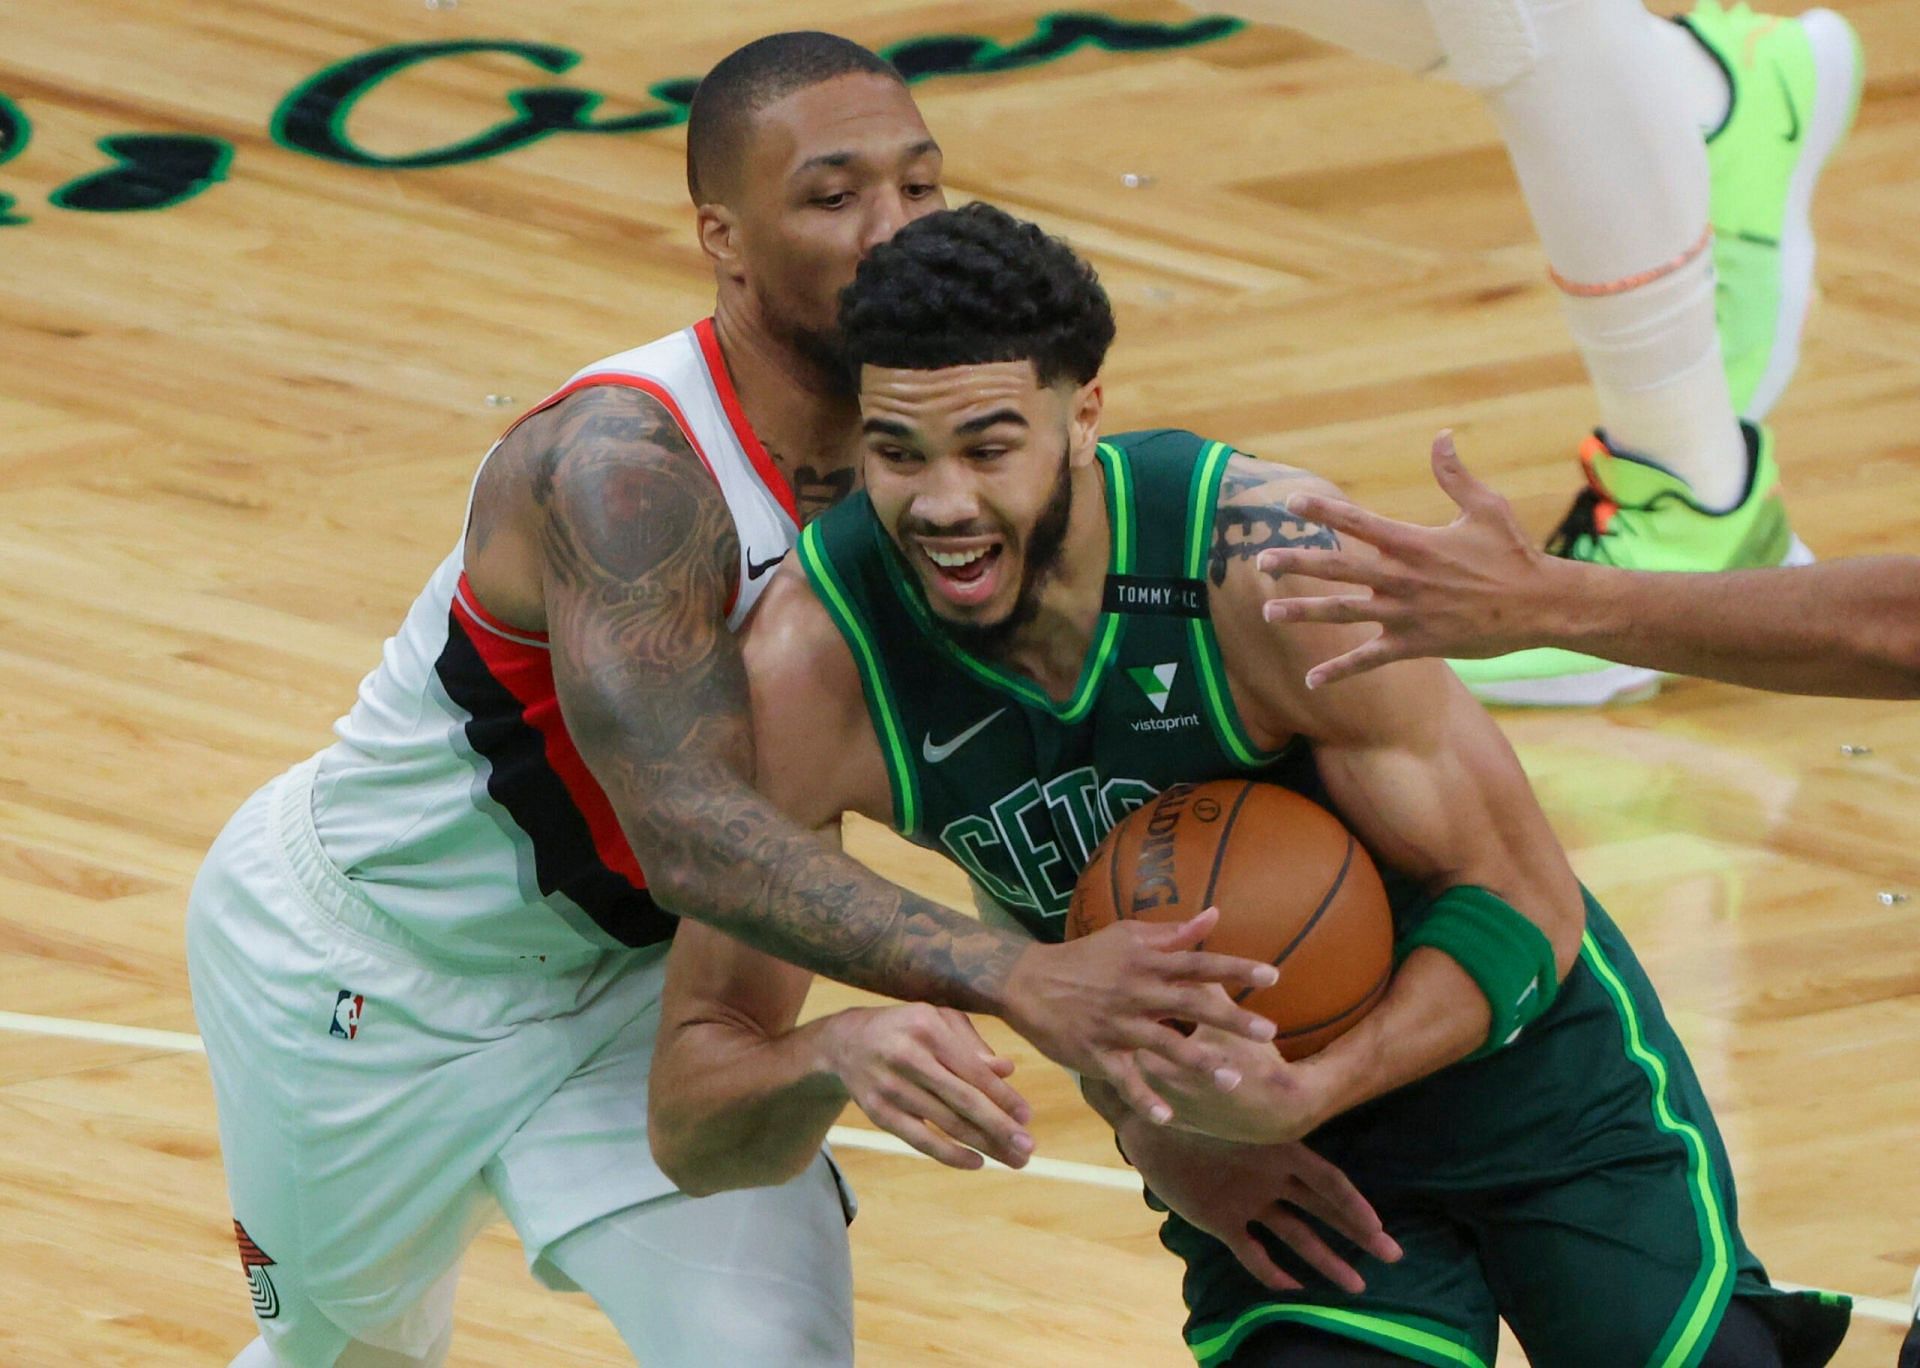 Without Damian Lillard, the visiting Portland Trail Blazers are hoping to split the season series against the Boston Celtics on Friday. [Photo: Boston.com]